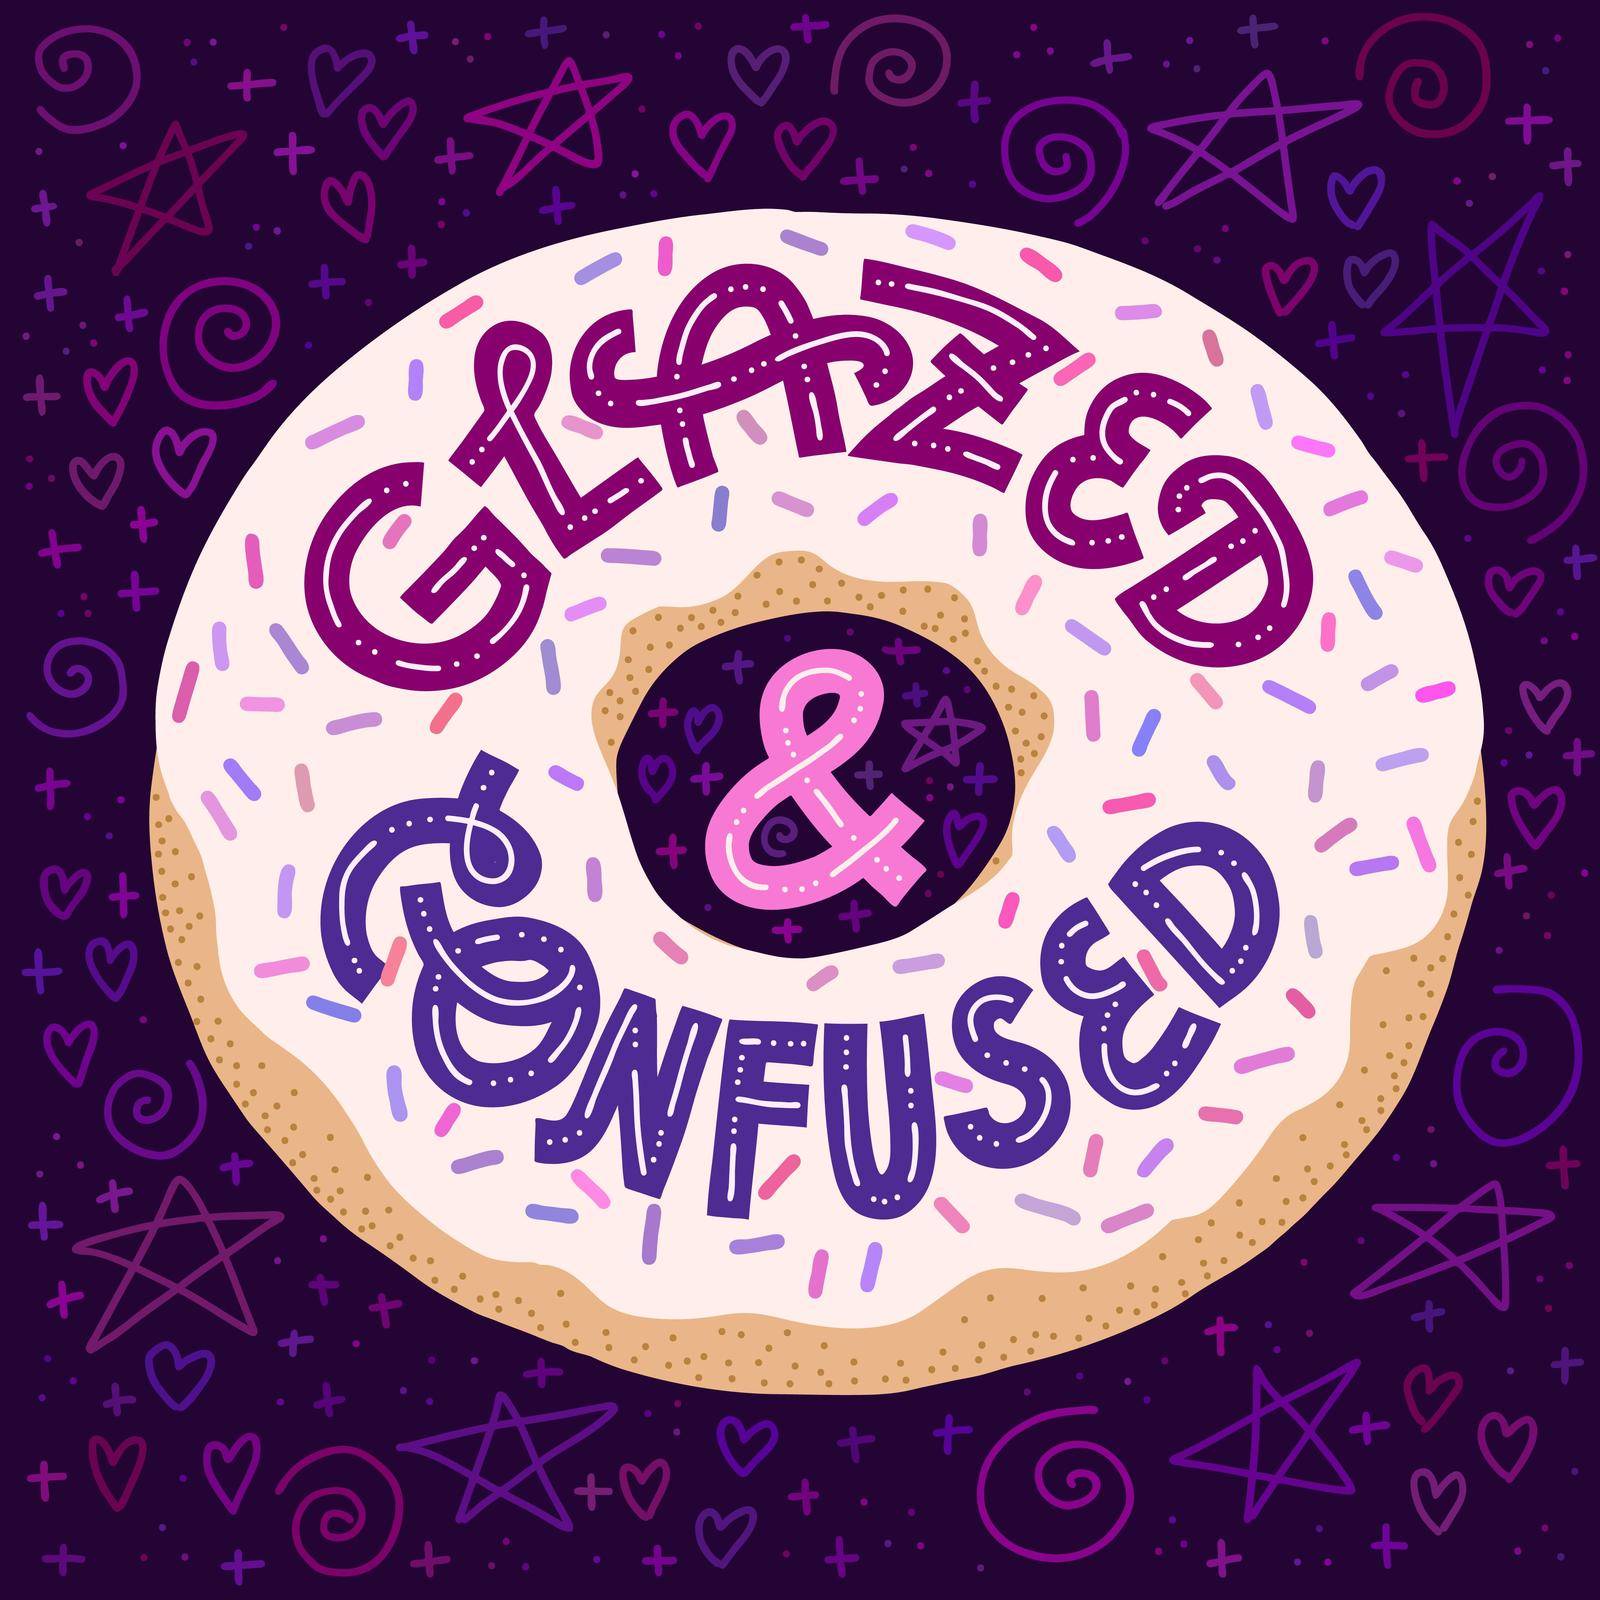 Glazed and Confuzed lettering on a donut by chickfishdoodles